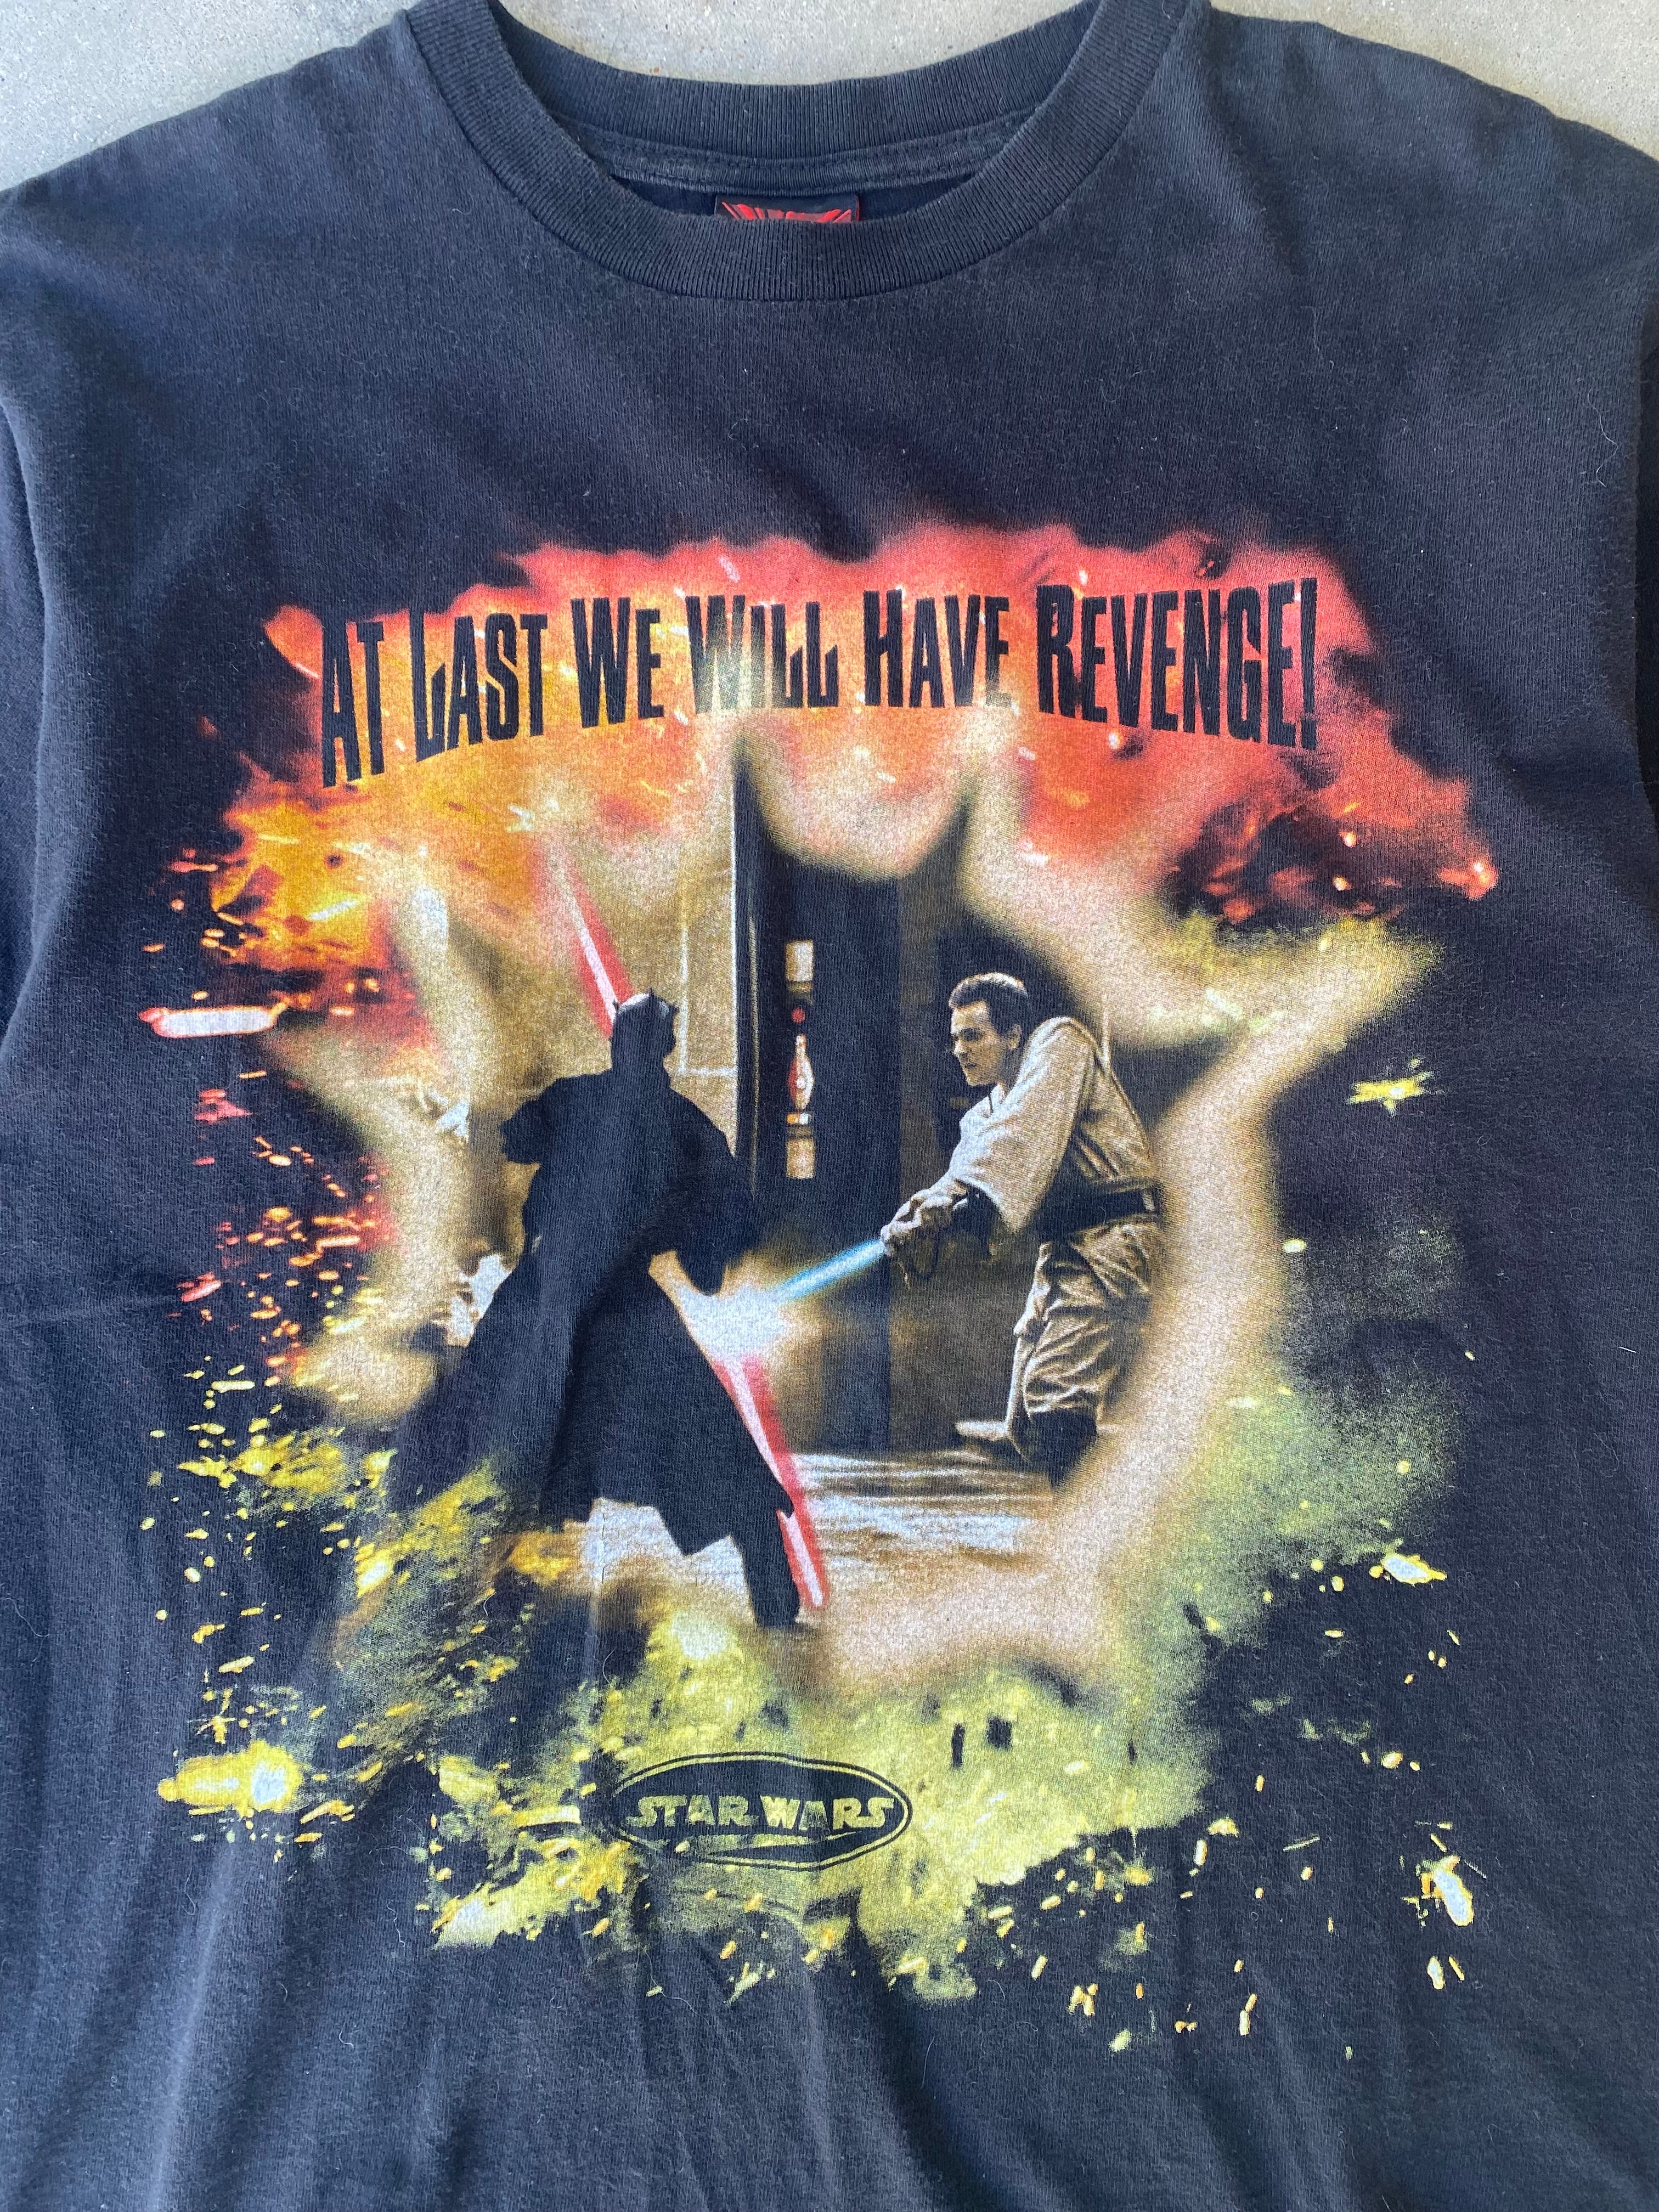 1999 Star Wars "At Last We Will Have Revenge" T-Shirt